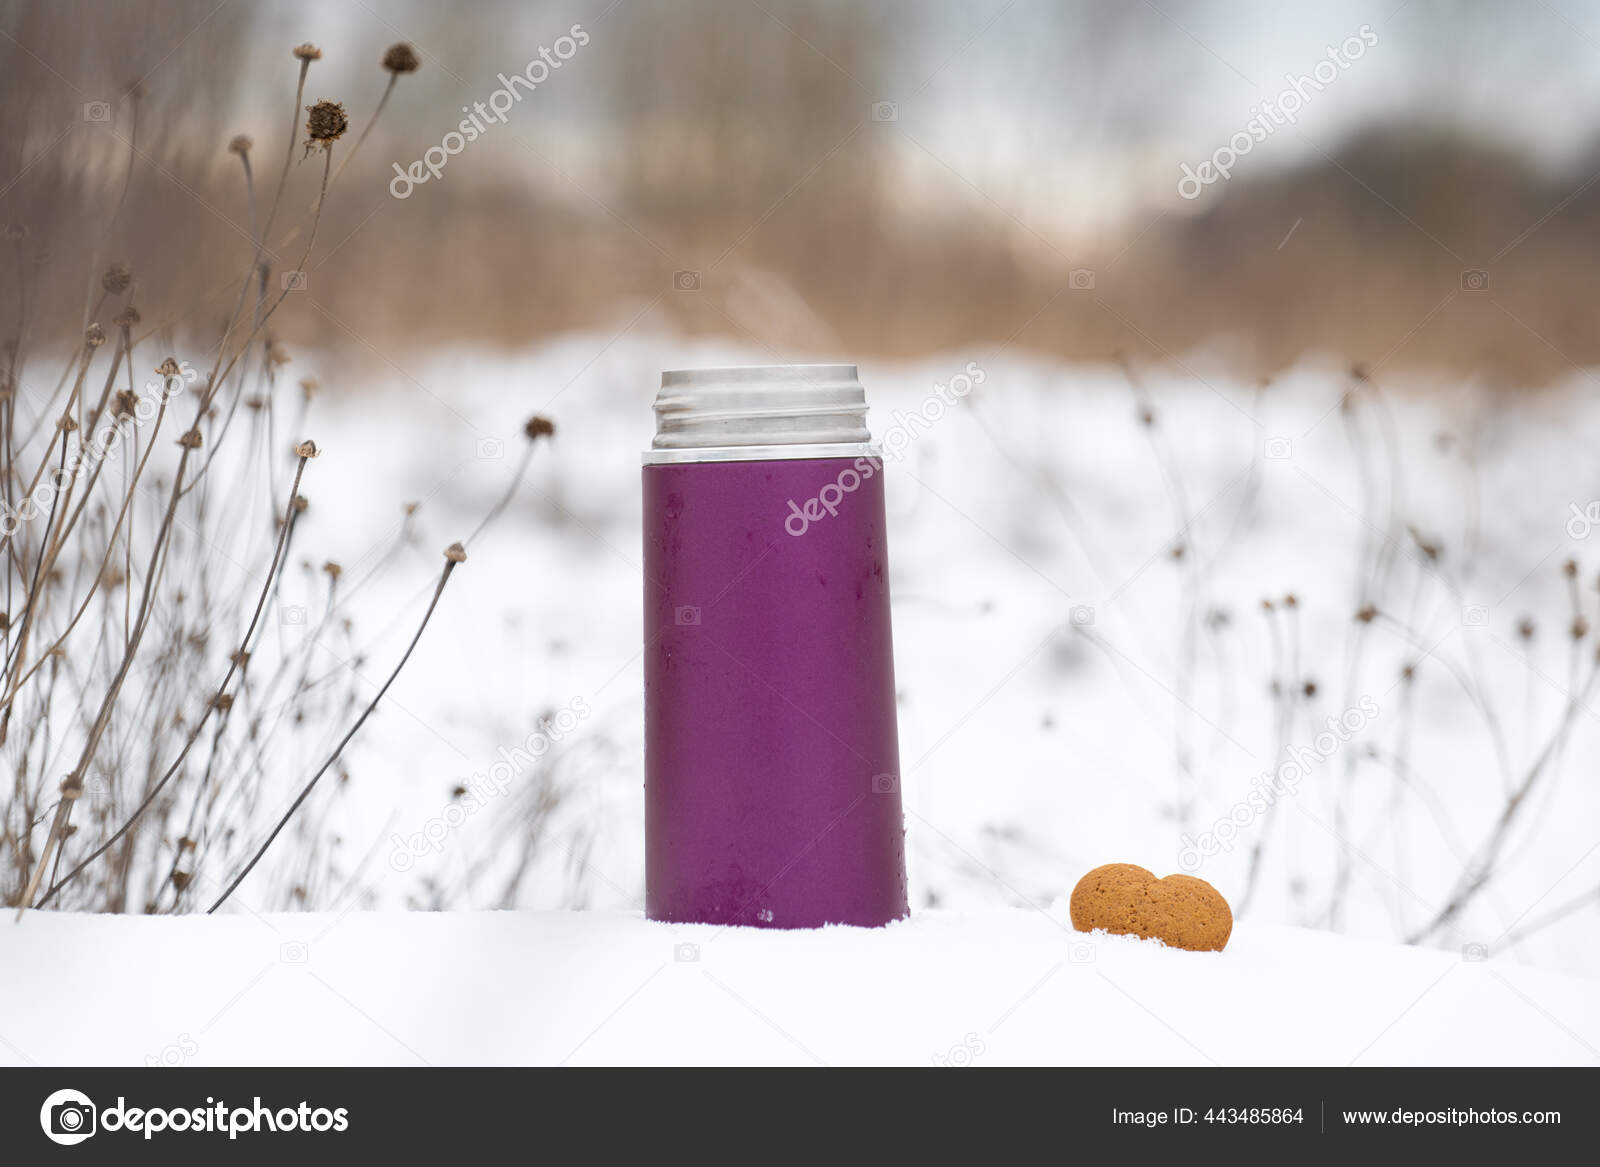 Small thermos with steaming hot drink on snow Stock Photo by